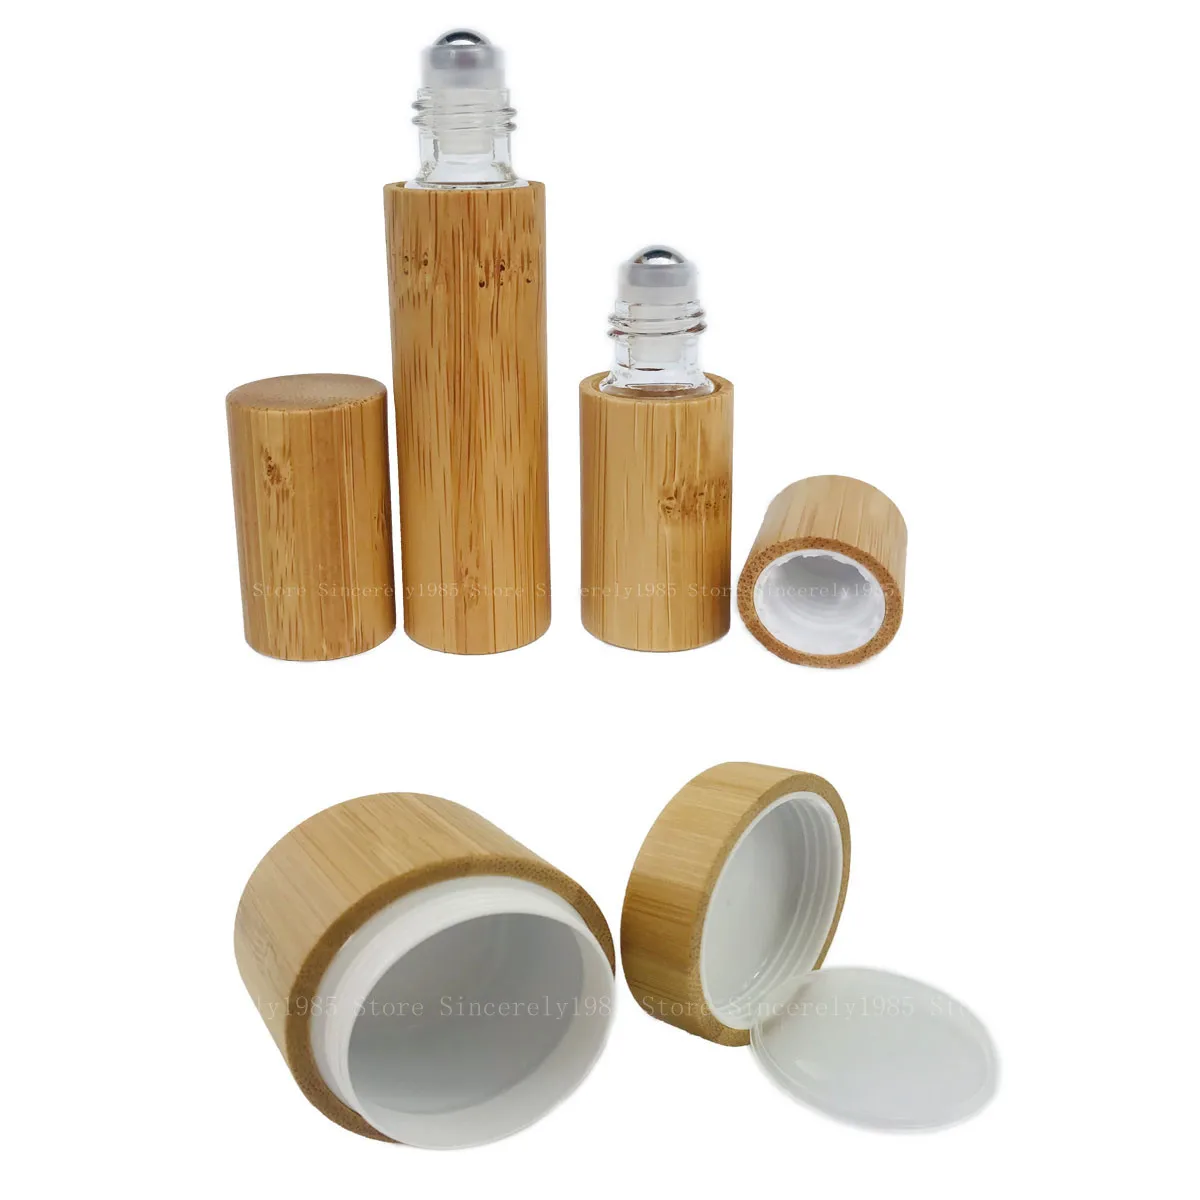 5ML 10ML Bamboo Wood Bottle Perfume Stainless Steel Roller Ball Aroma Diffuser Bottle, 30ml Face Cream Cosmetic Container Bottle wood grain humidifier 300ml usb aroma diffuser atomizer usb household humidifier hydrating instrument desktop humidifier